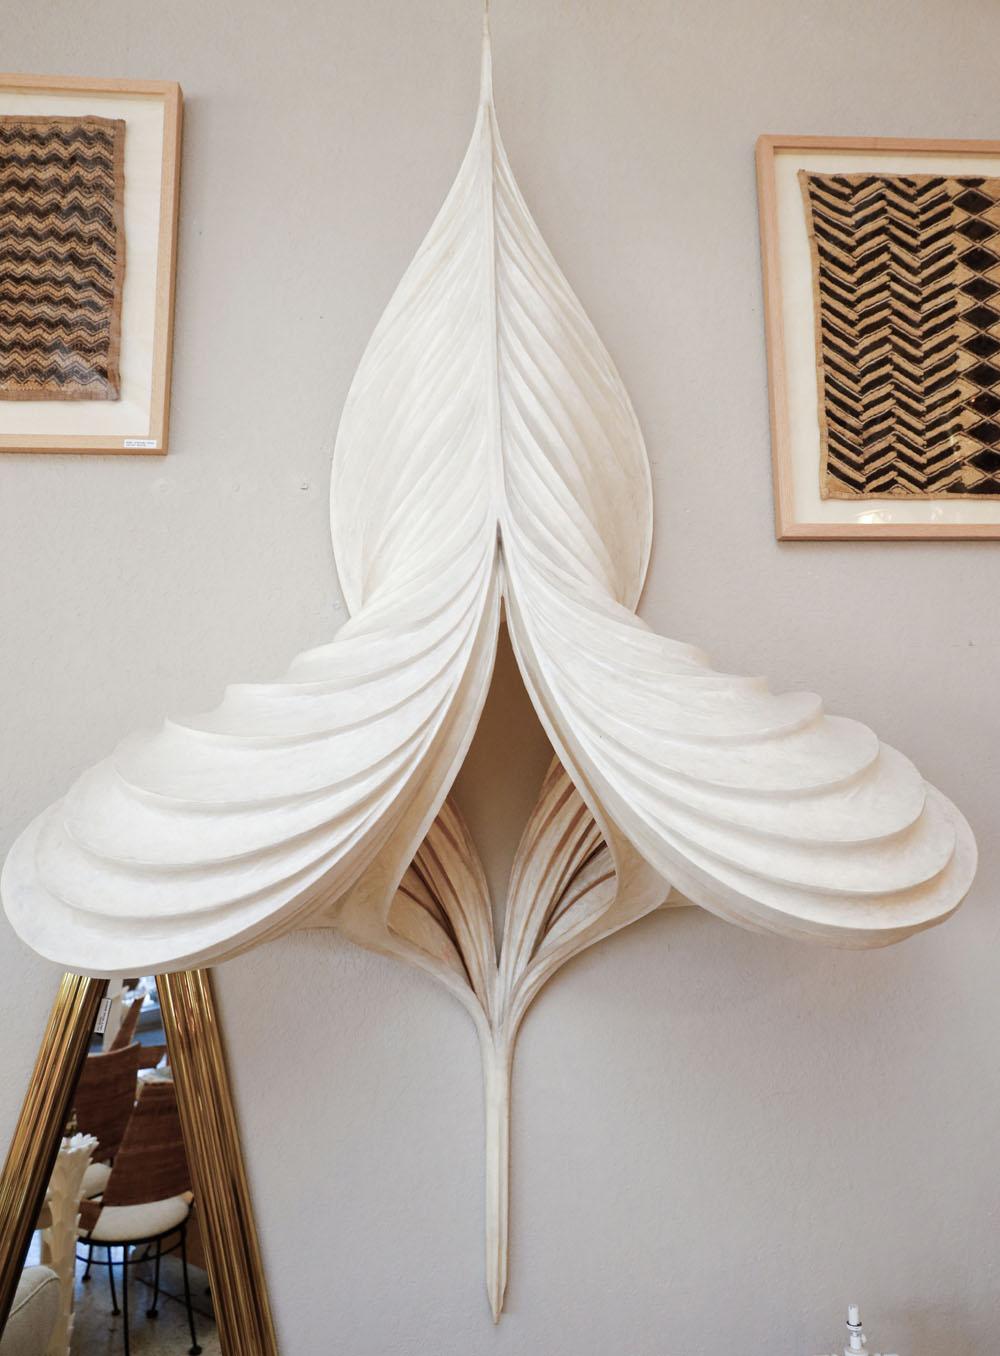 Unknown Giant Organic Shaped Paper Lantern Wall Sconce